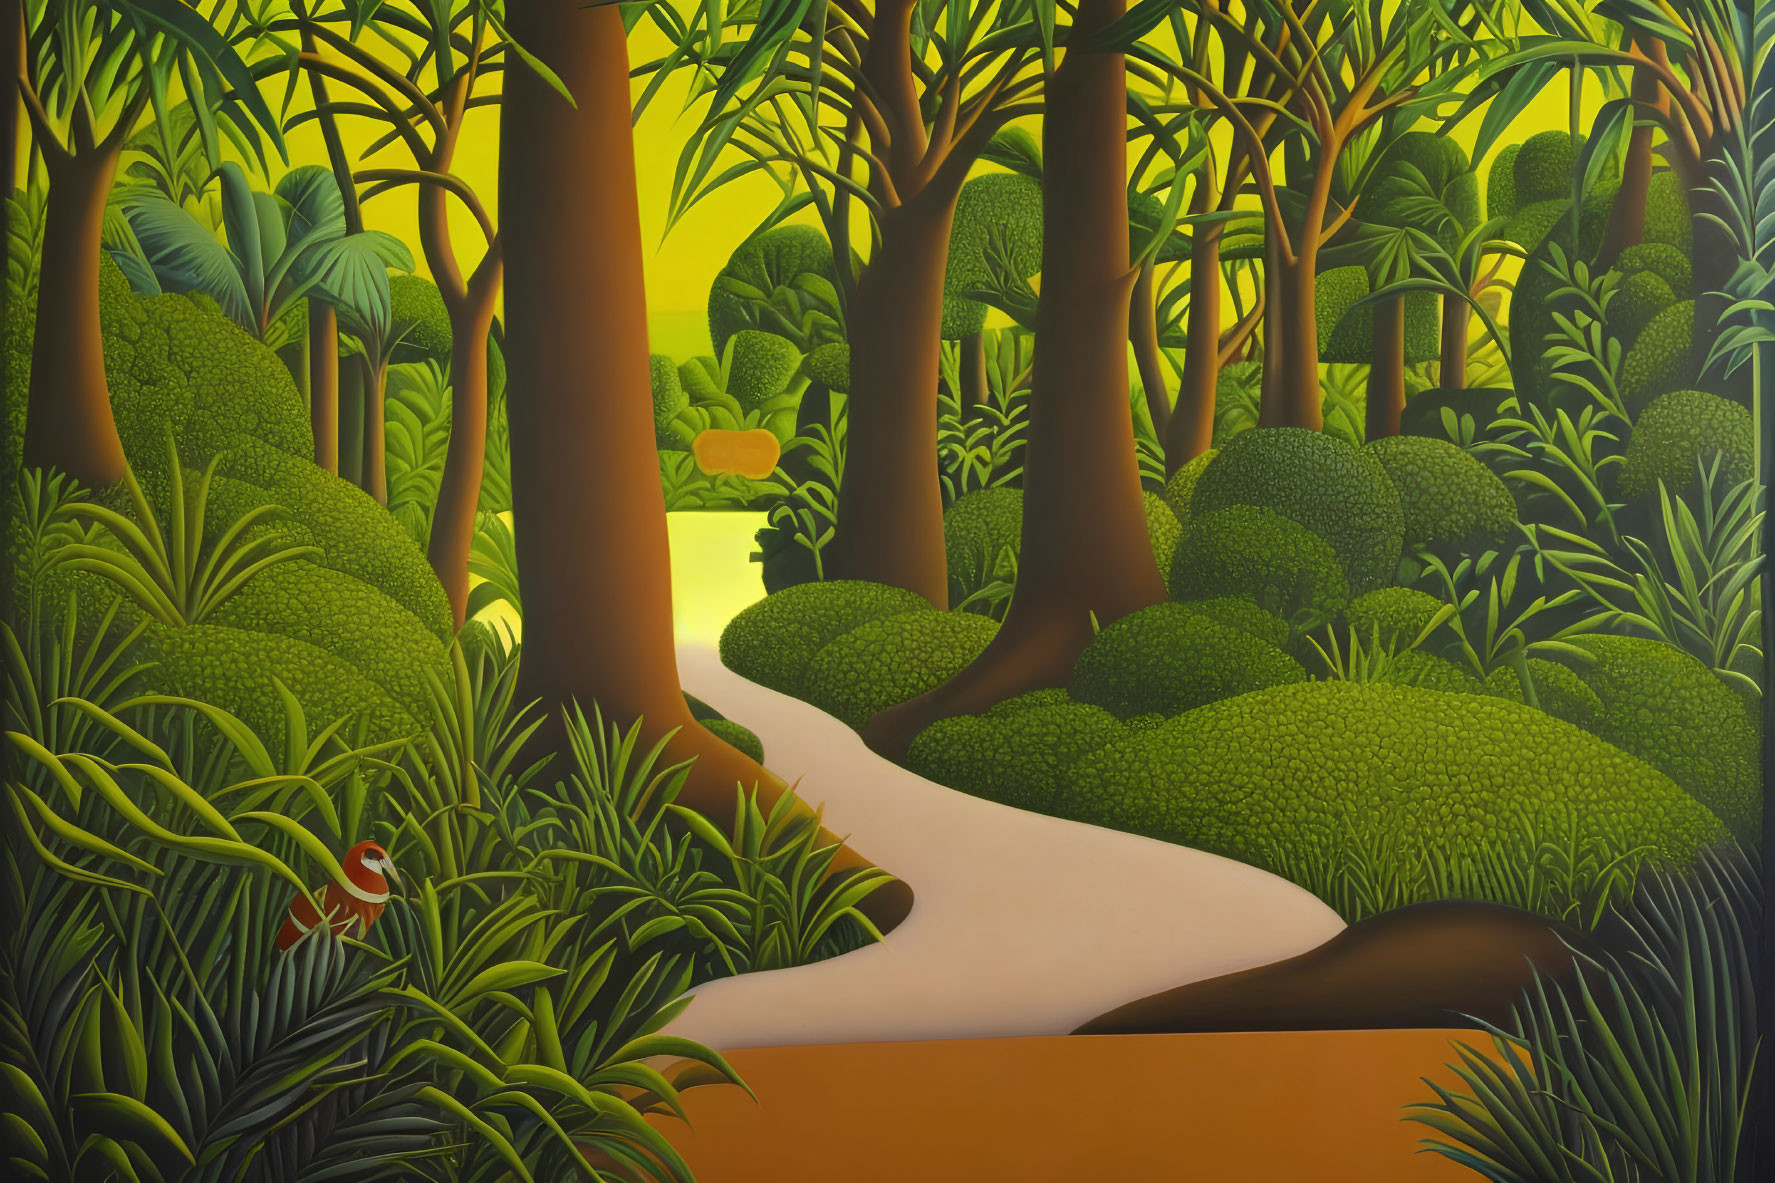 Jungle, in the style of George Callaghan